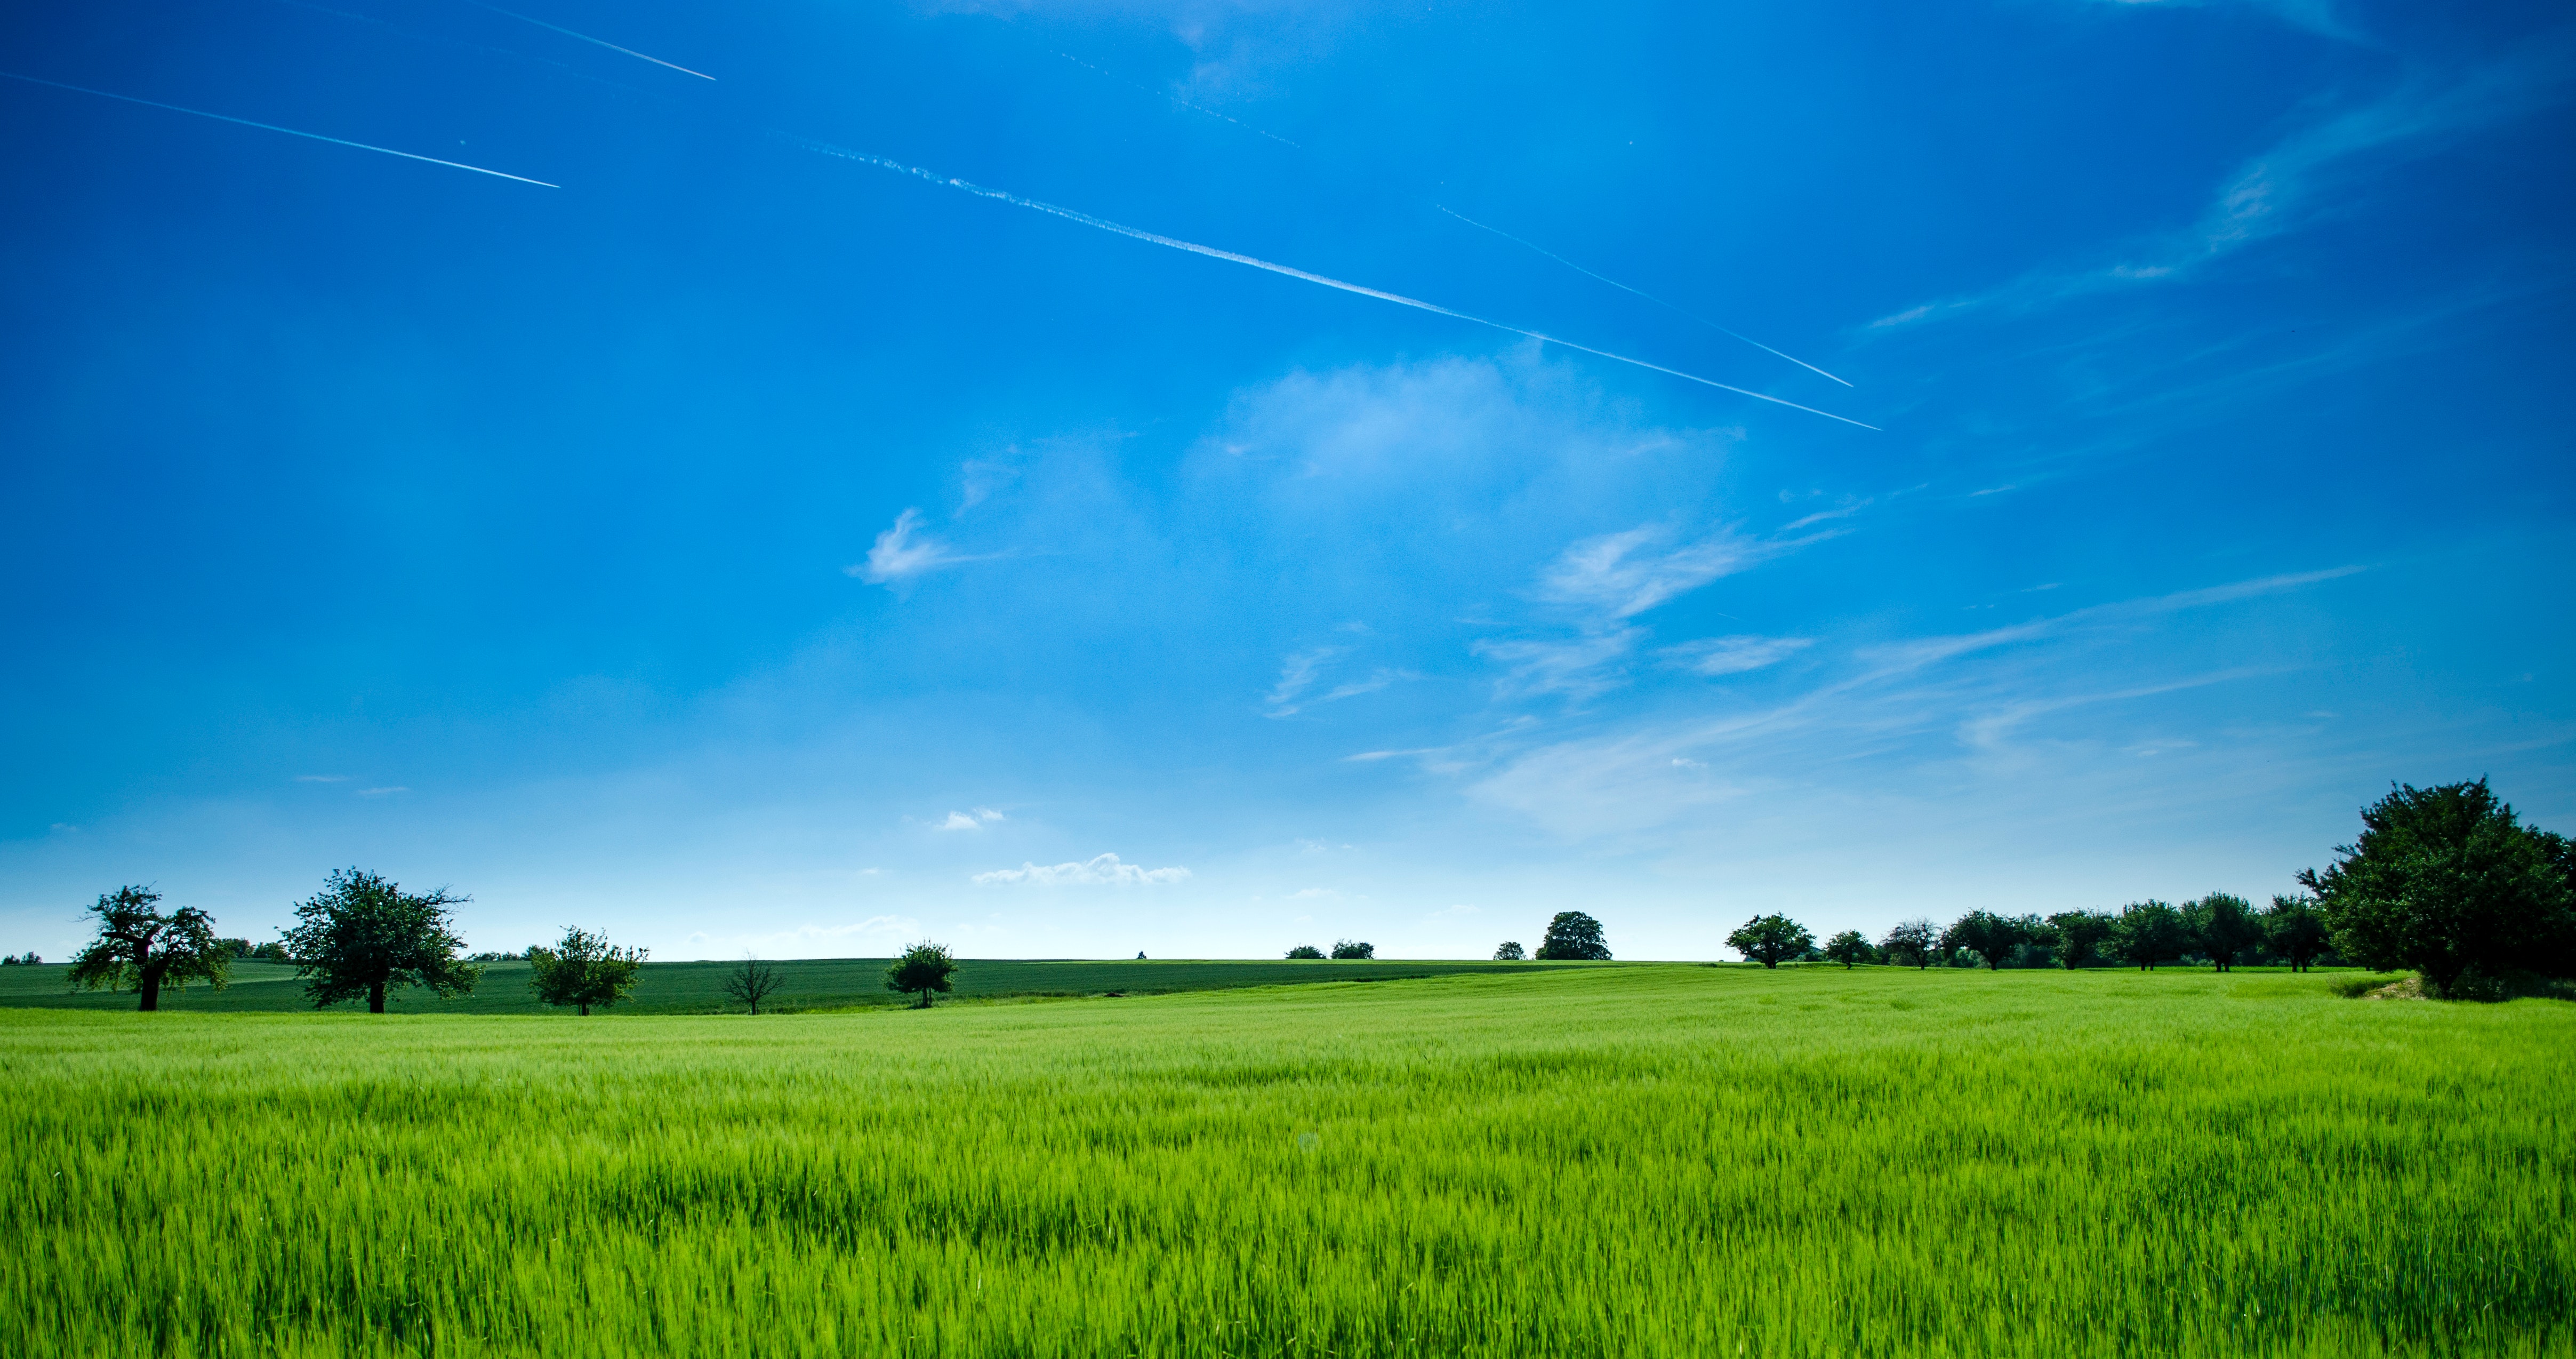 Image of a green field